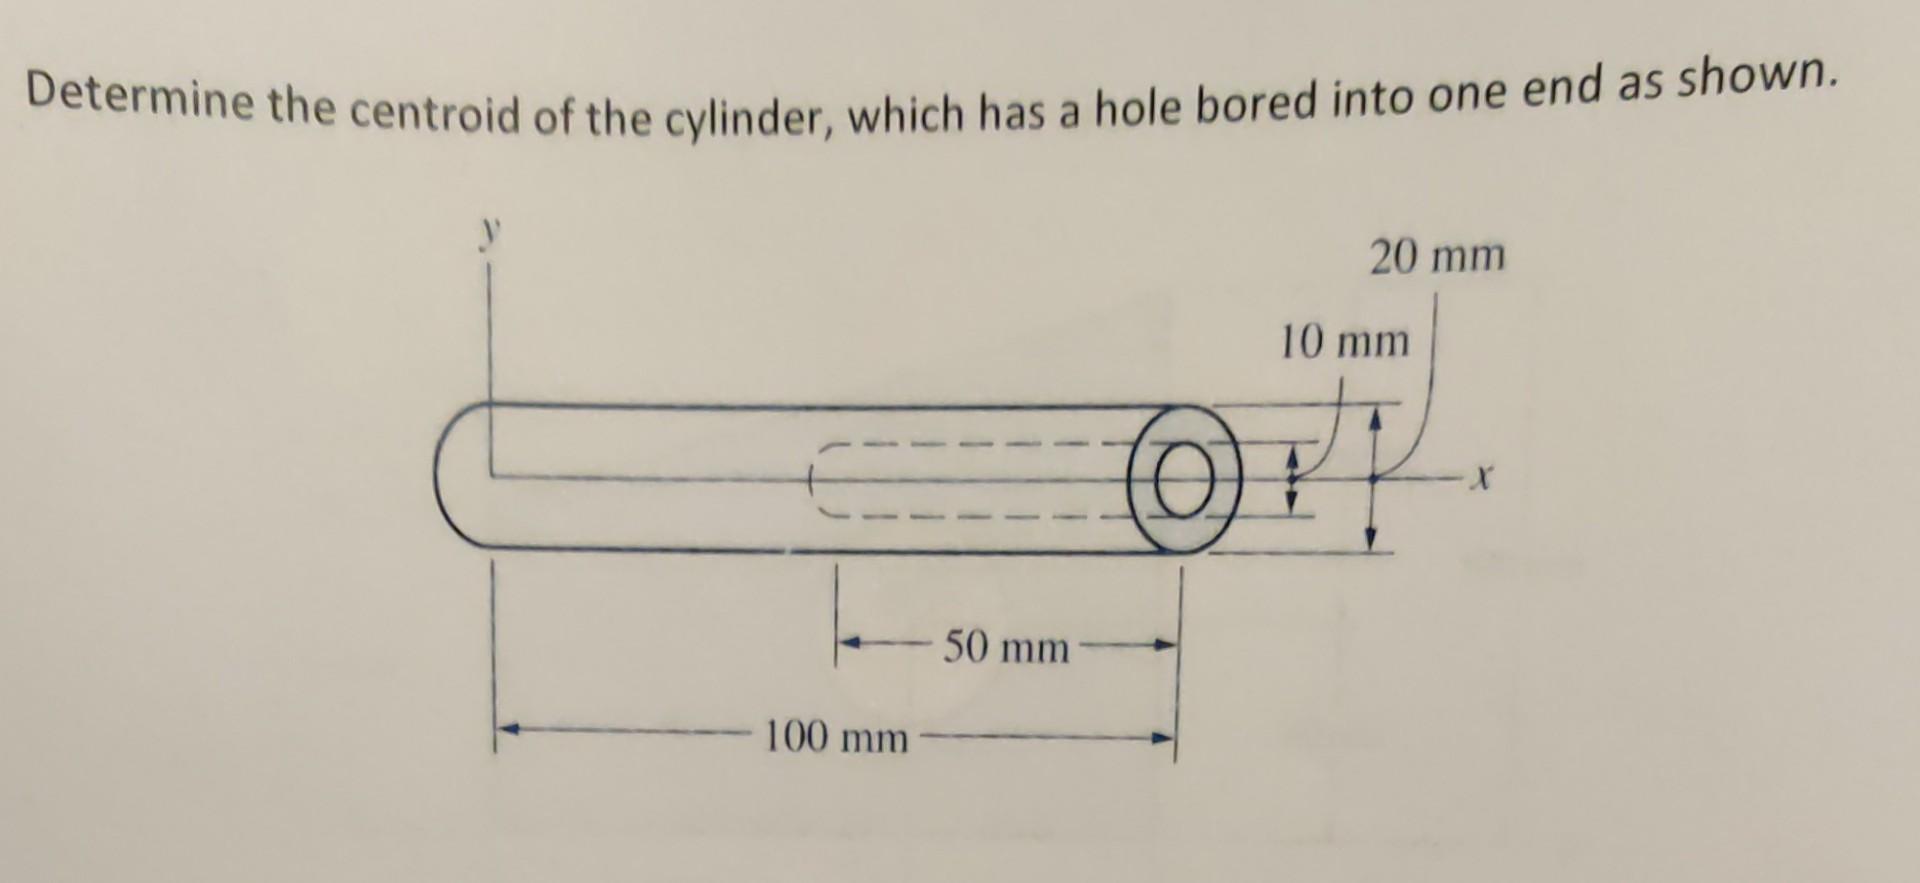 Solved Determine the centroid of the cylinder, which has a | Chegg.com